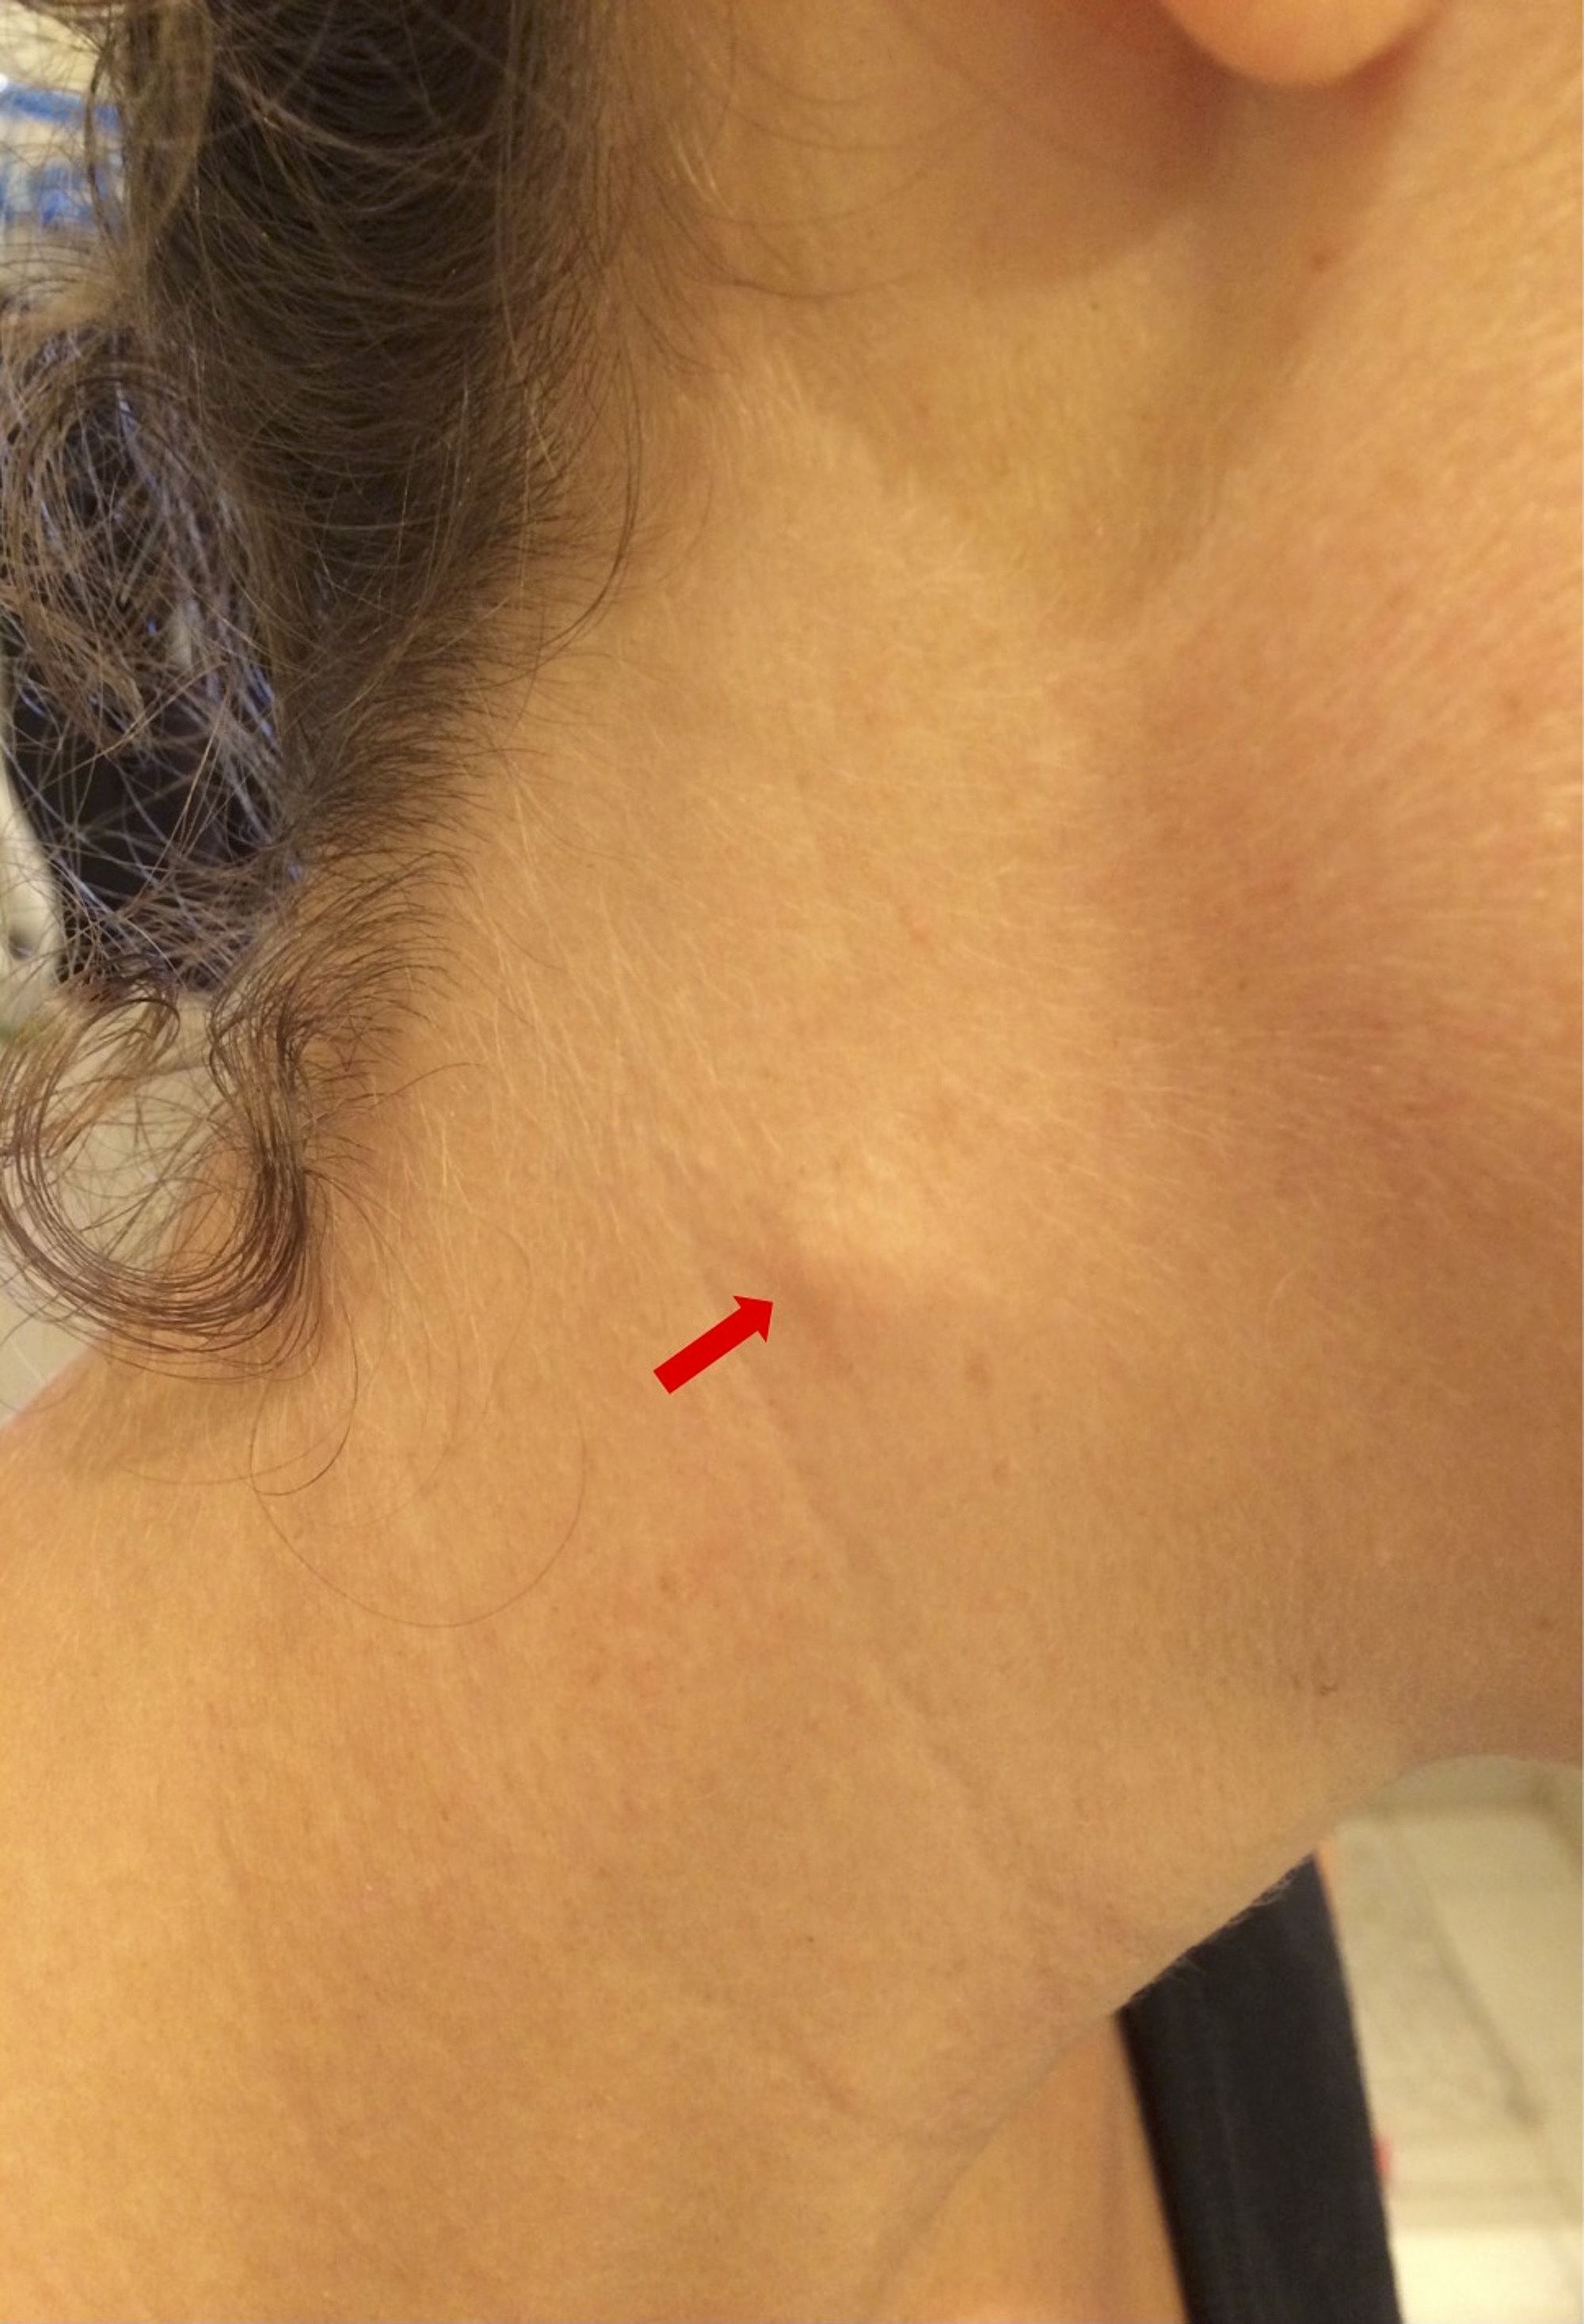 Cervical Lymph Node Swelling On Neck My Xxx Hot Girl